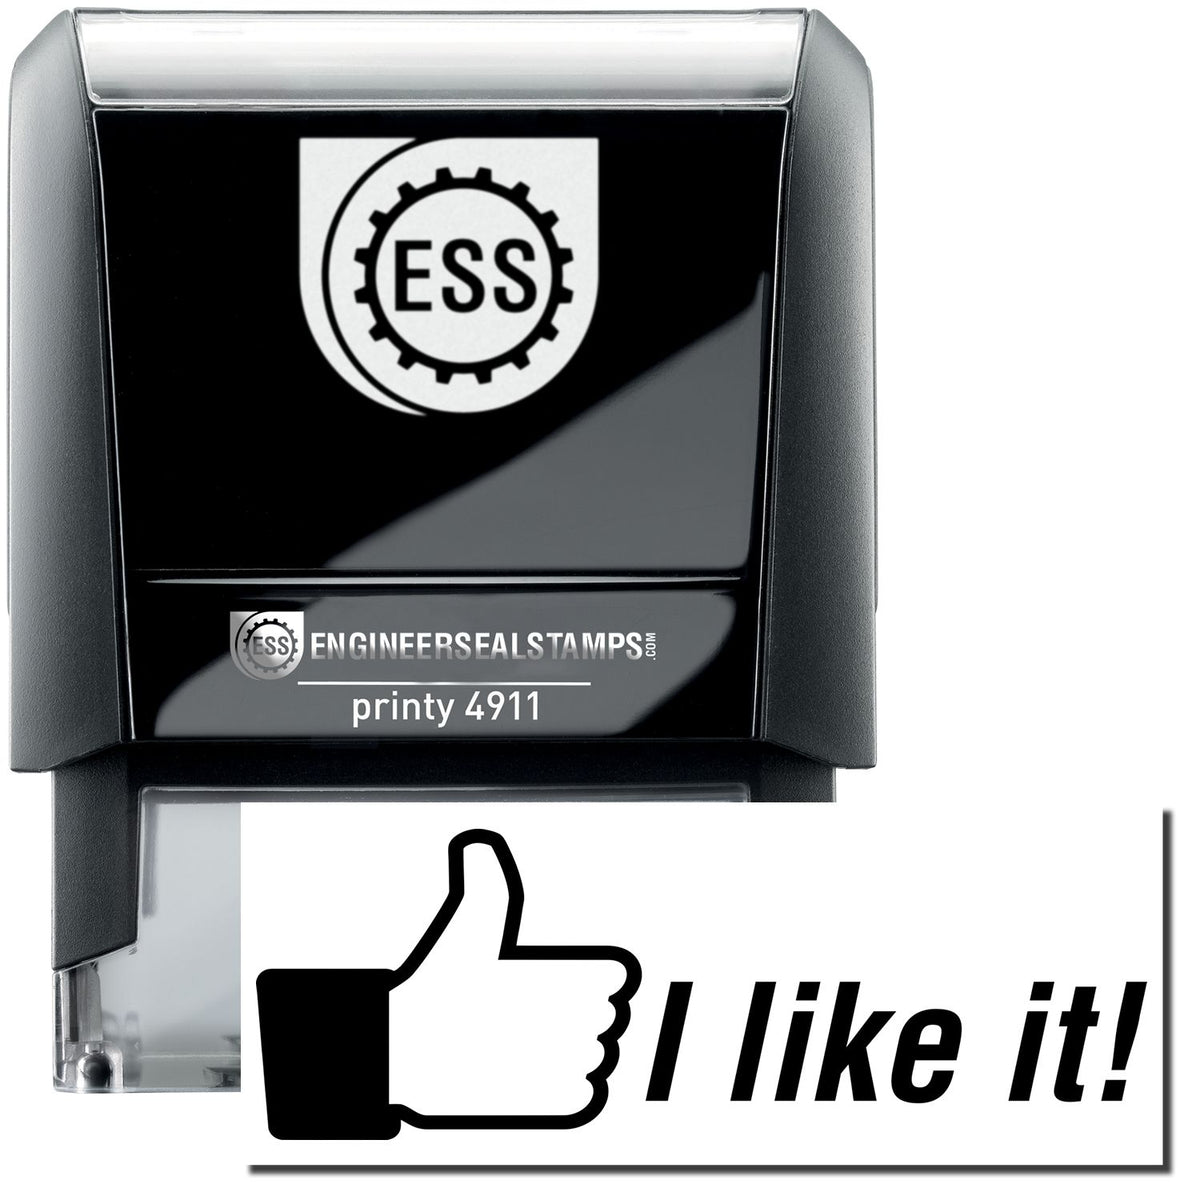 A self-inking stamp with a stamped image showing how the text &quot;I like it!&quot; (with a thumbs-up icon on the left) is displayed after stamping.